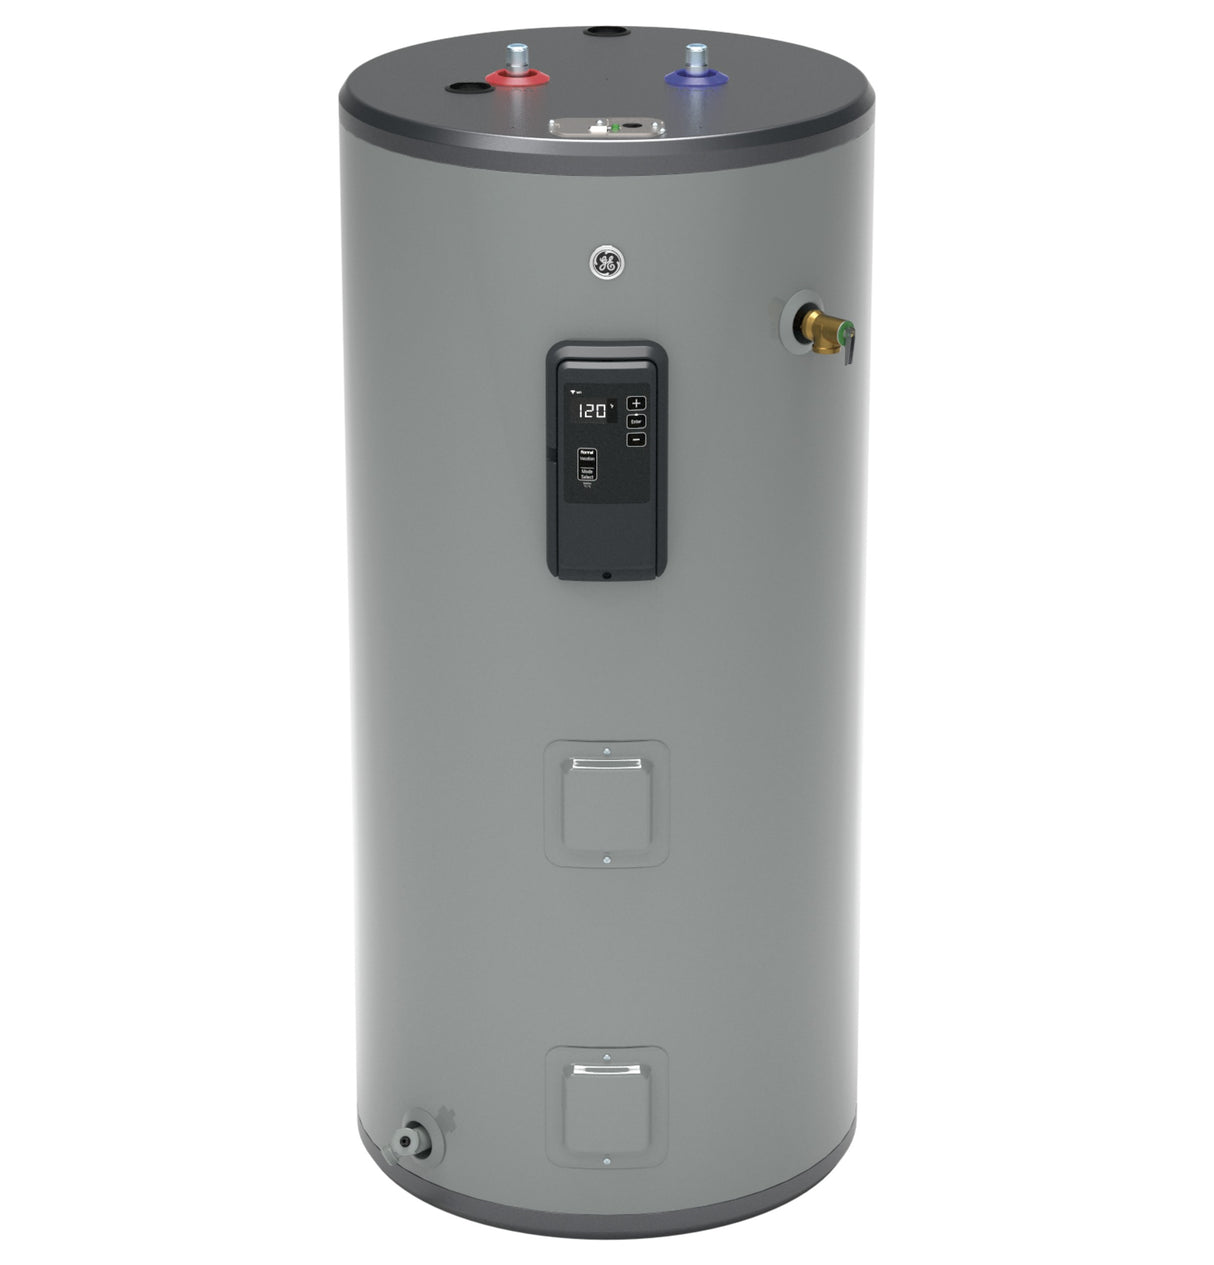 GE(R) Smart 50 Gallon Short Electric Water Heater - (GE50S10BLM)